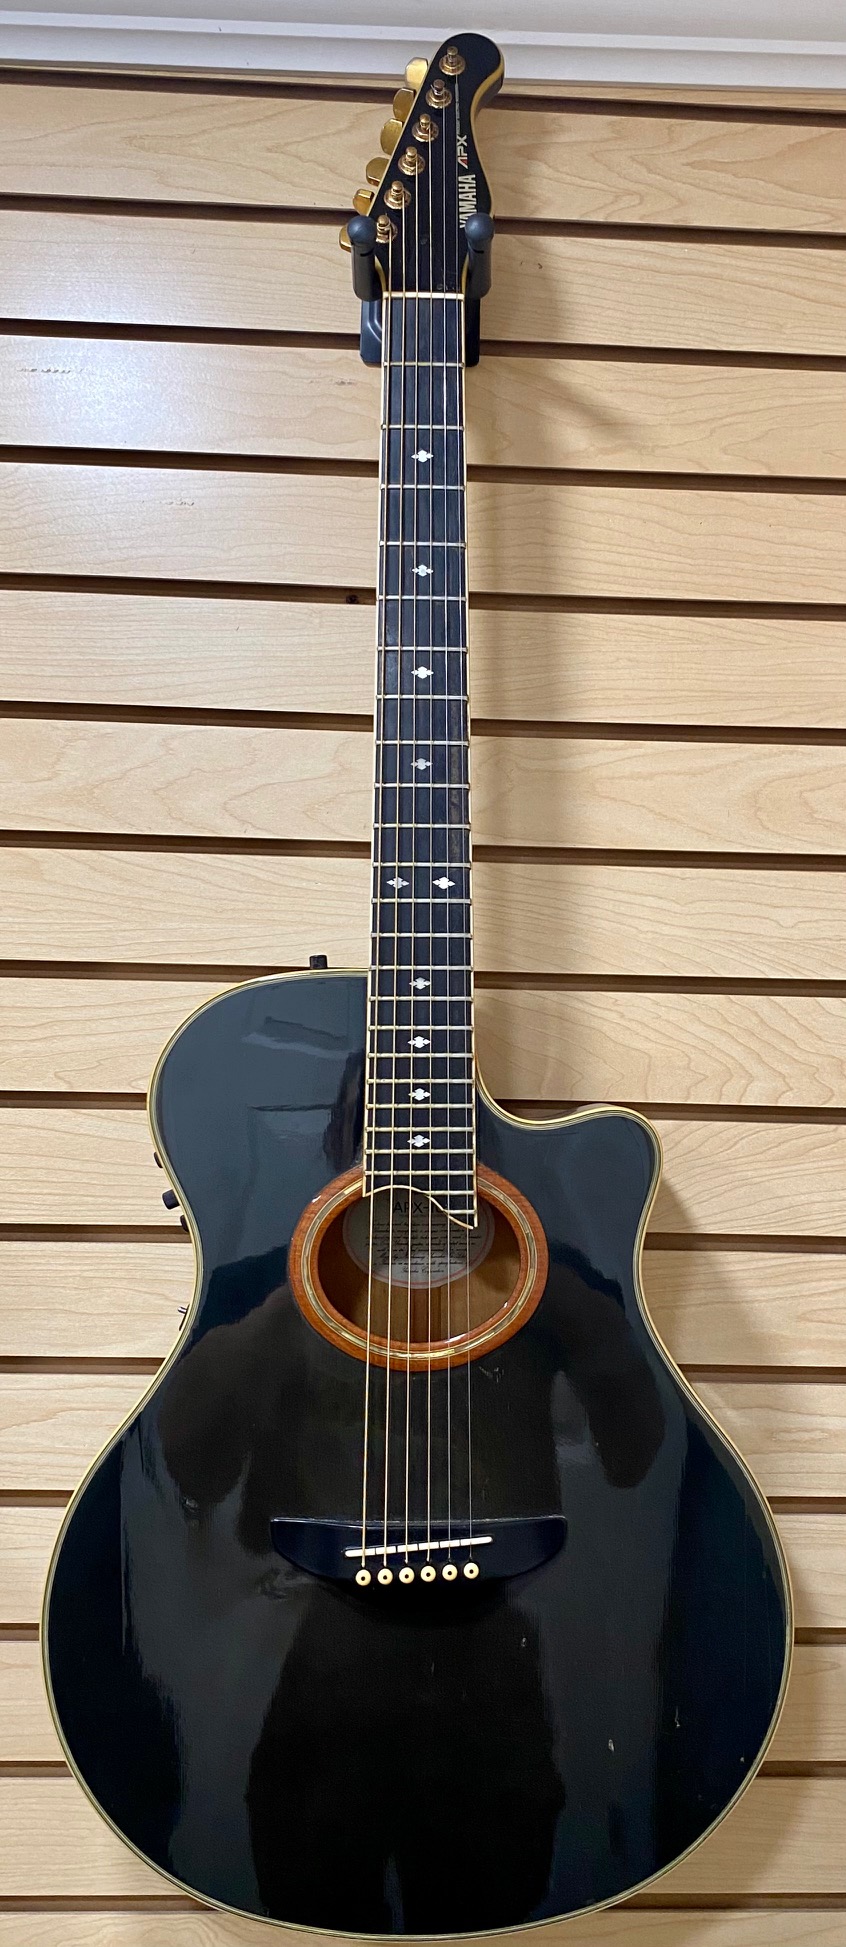 Yamaha APX-10s Acoustic / Electric Guitar - Nickels Music